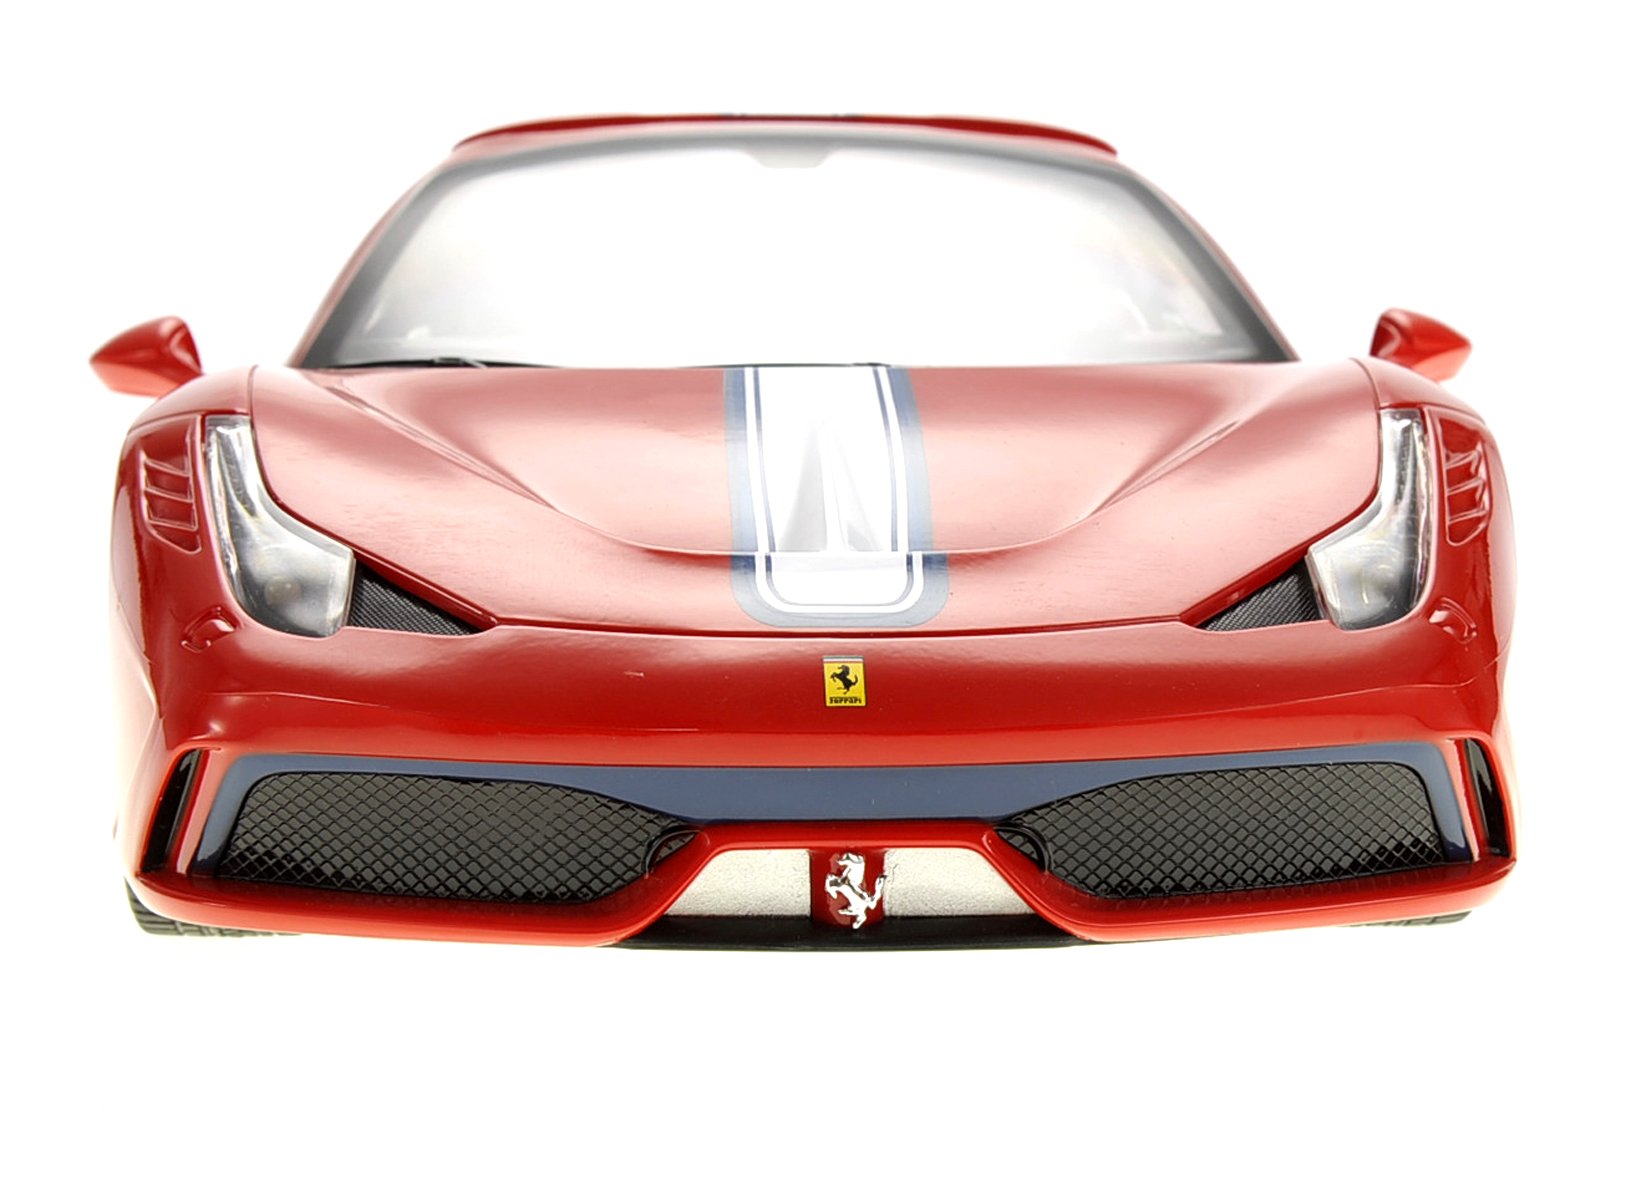 PowerTRC 1:14 Remote Conrol Ferrari 458 Speciale with Functional Convertible Top | RC Electric Hobby Racing Car for Boys, Girls & Adults (Red)